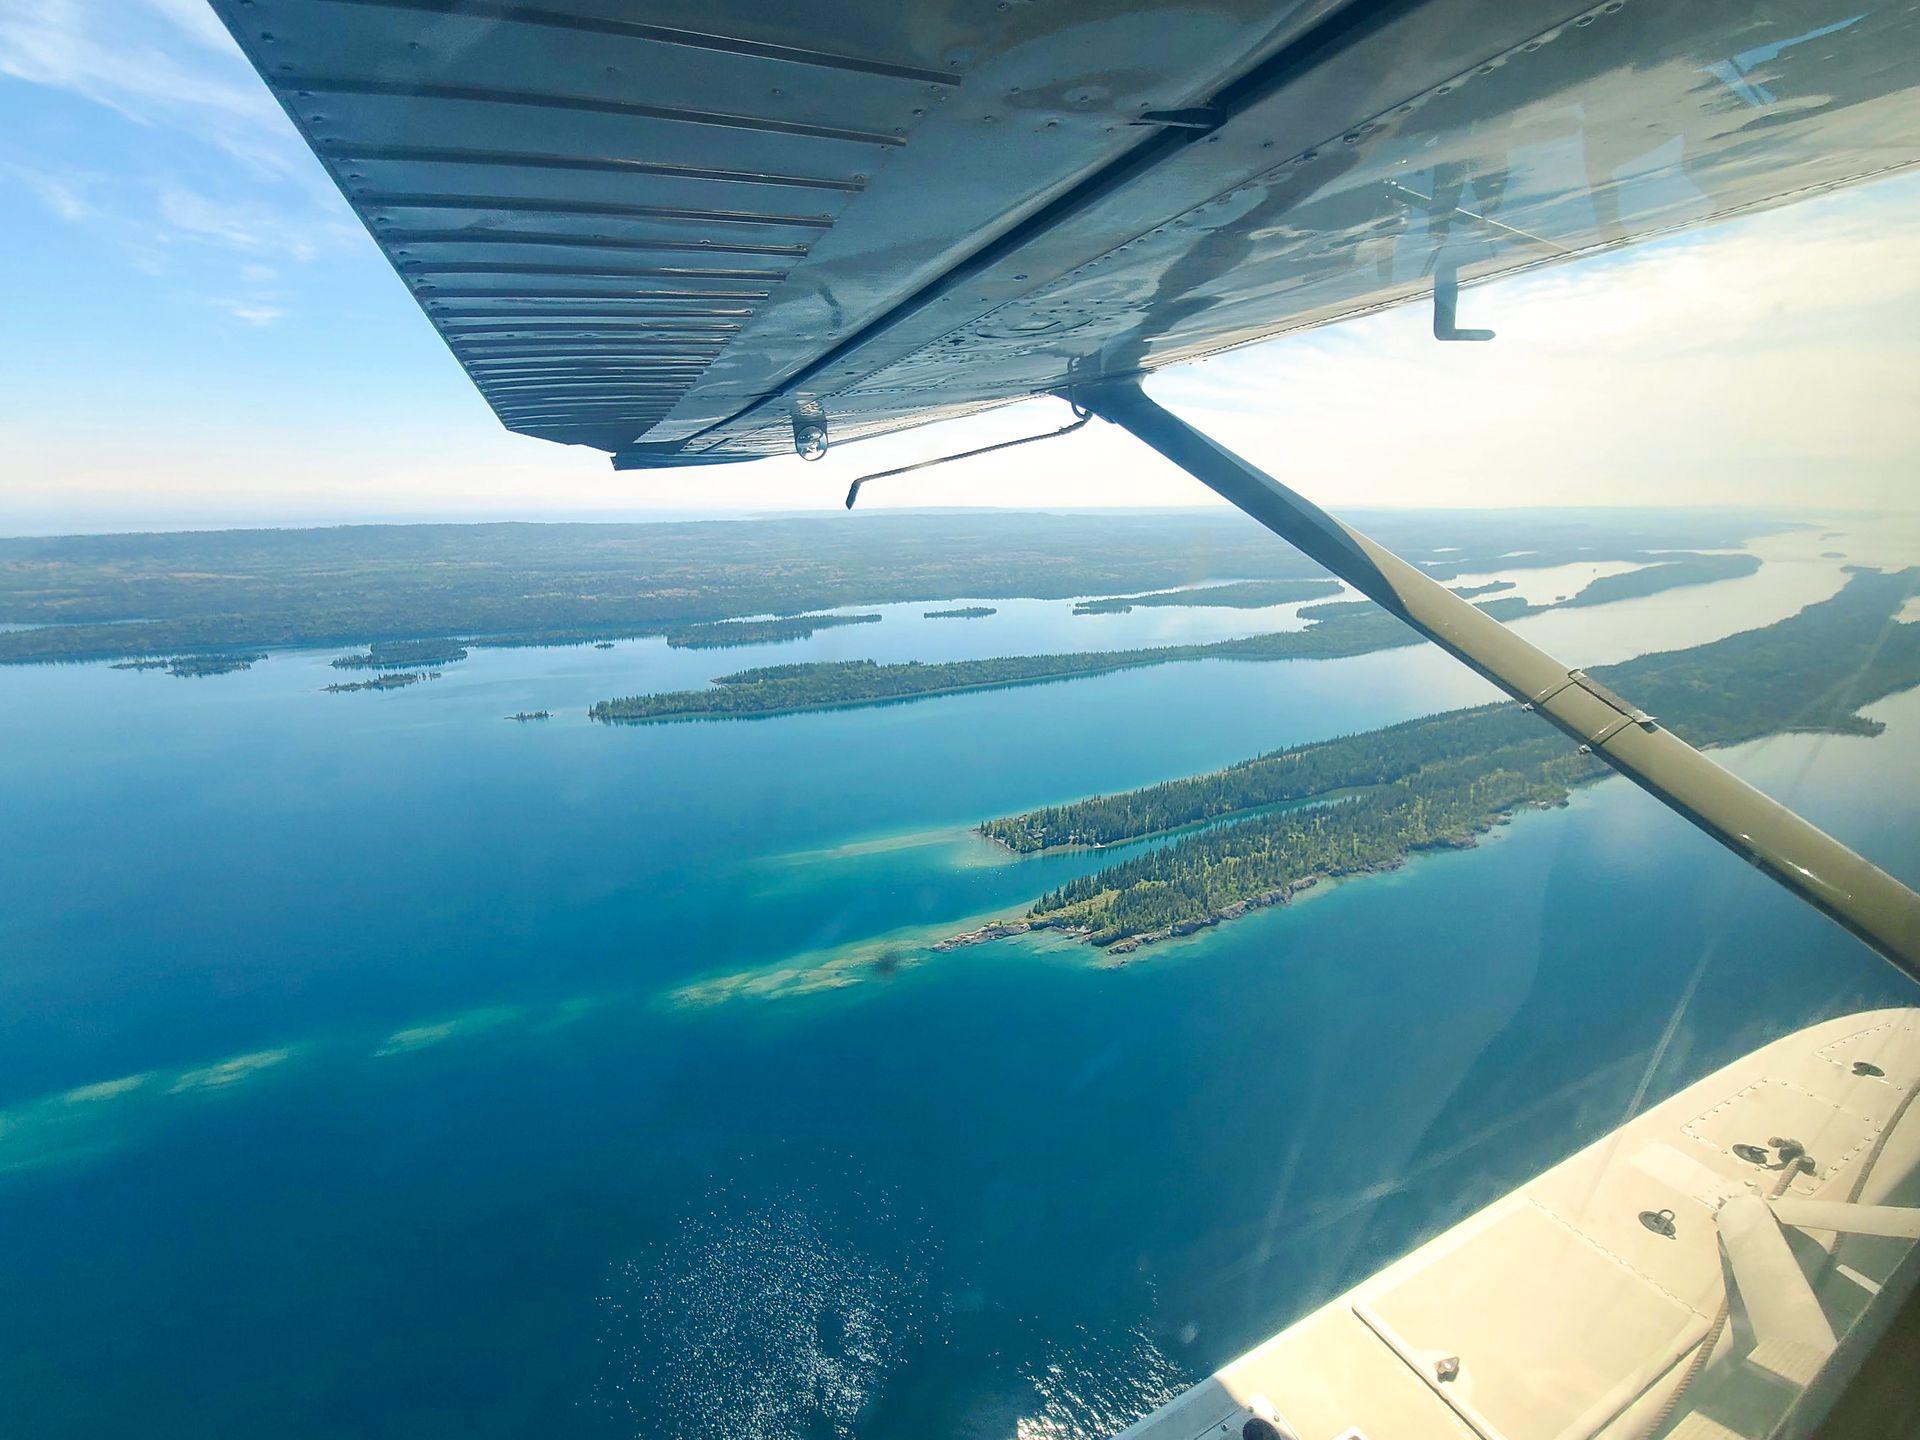 A view looking down at Isle Royale Island from a seaplane. You can see multiple islands with green trees.